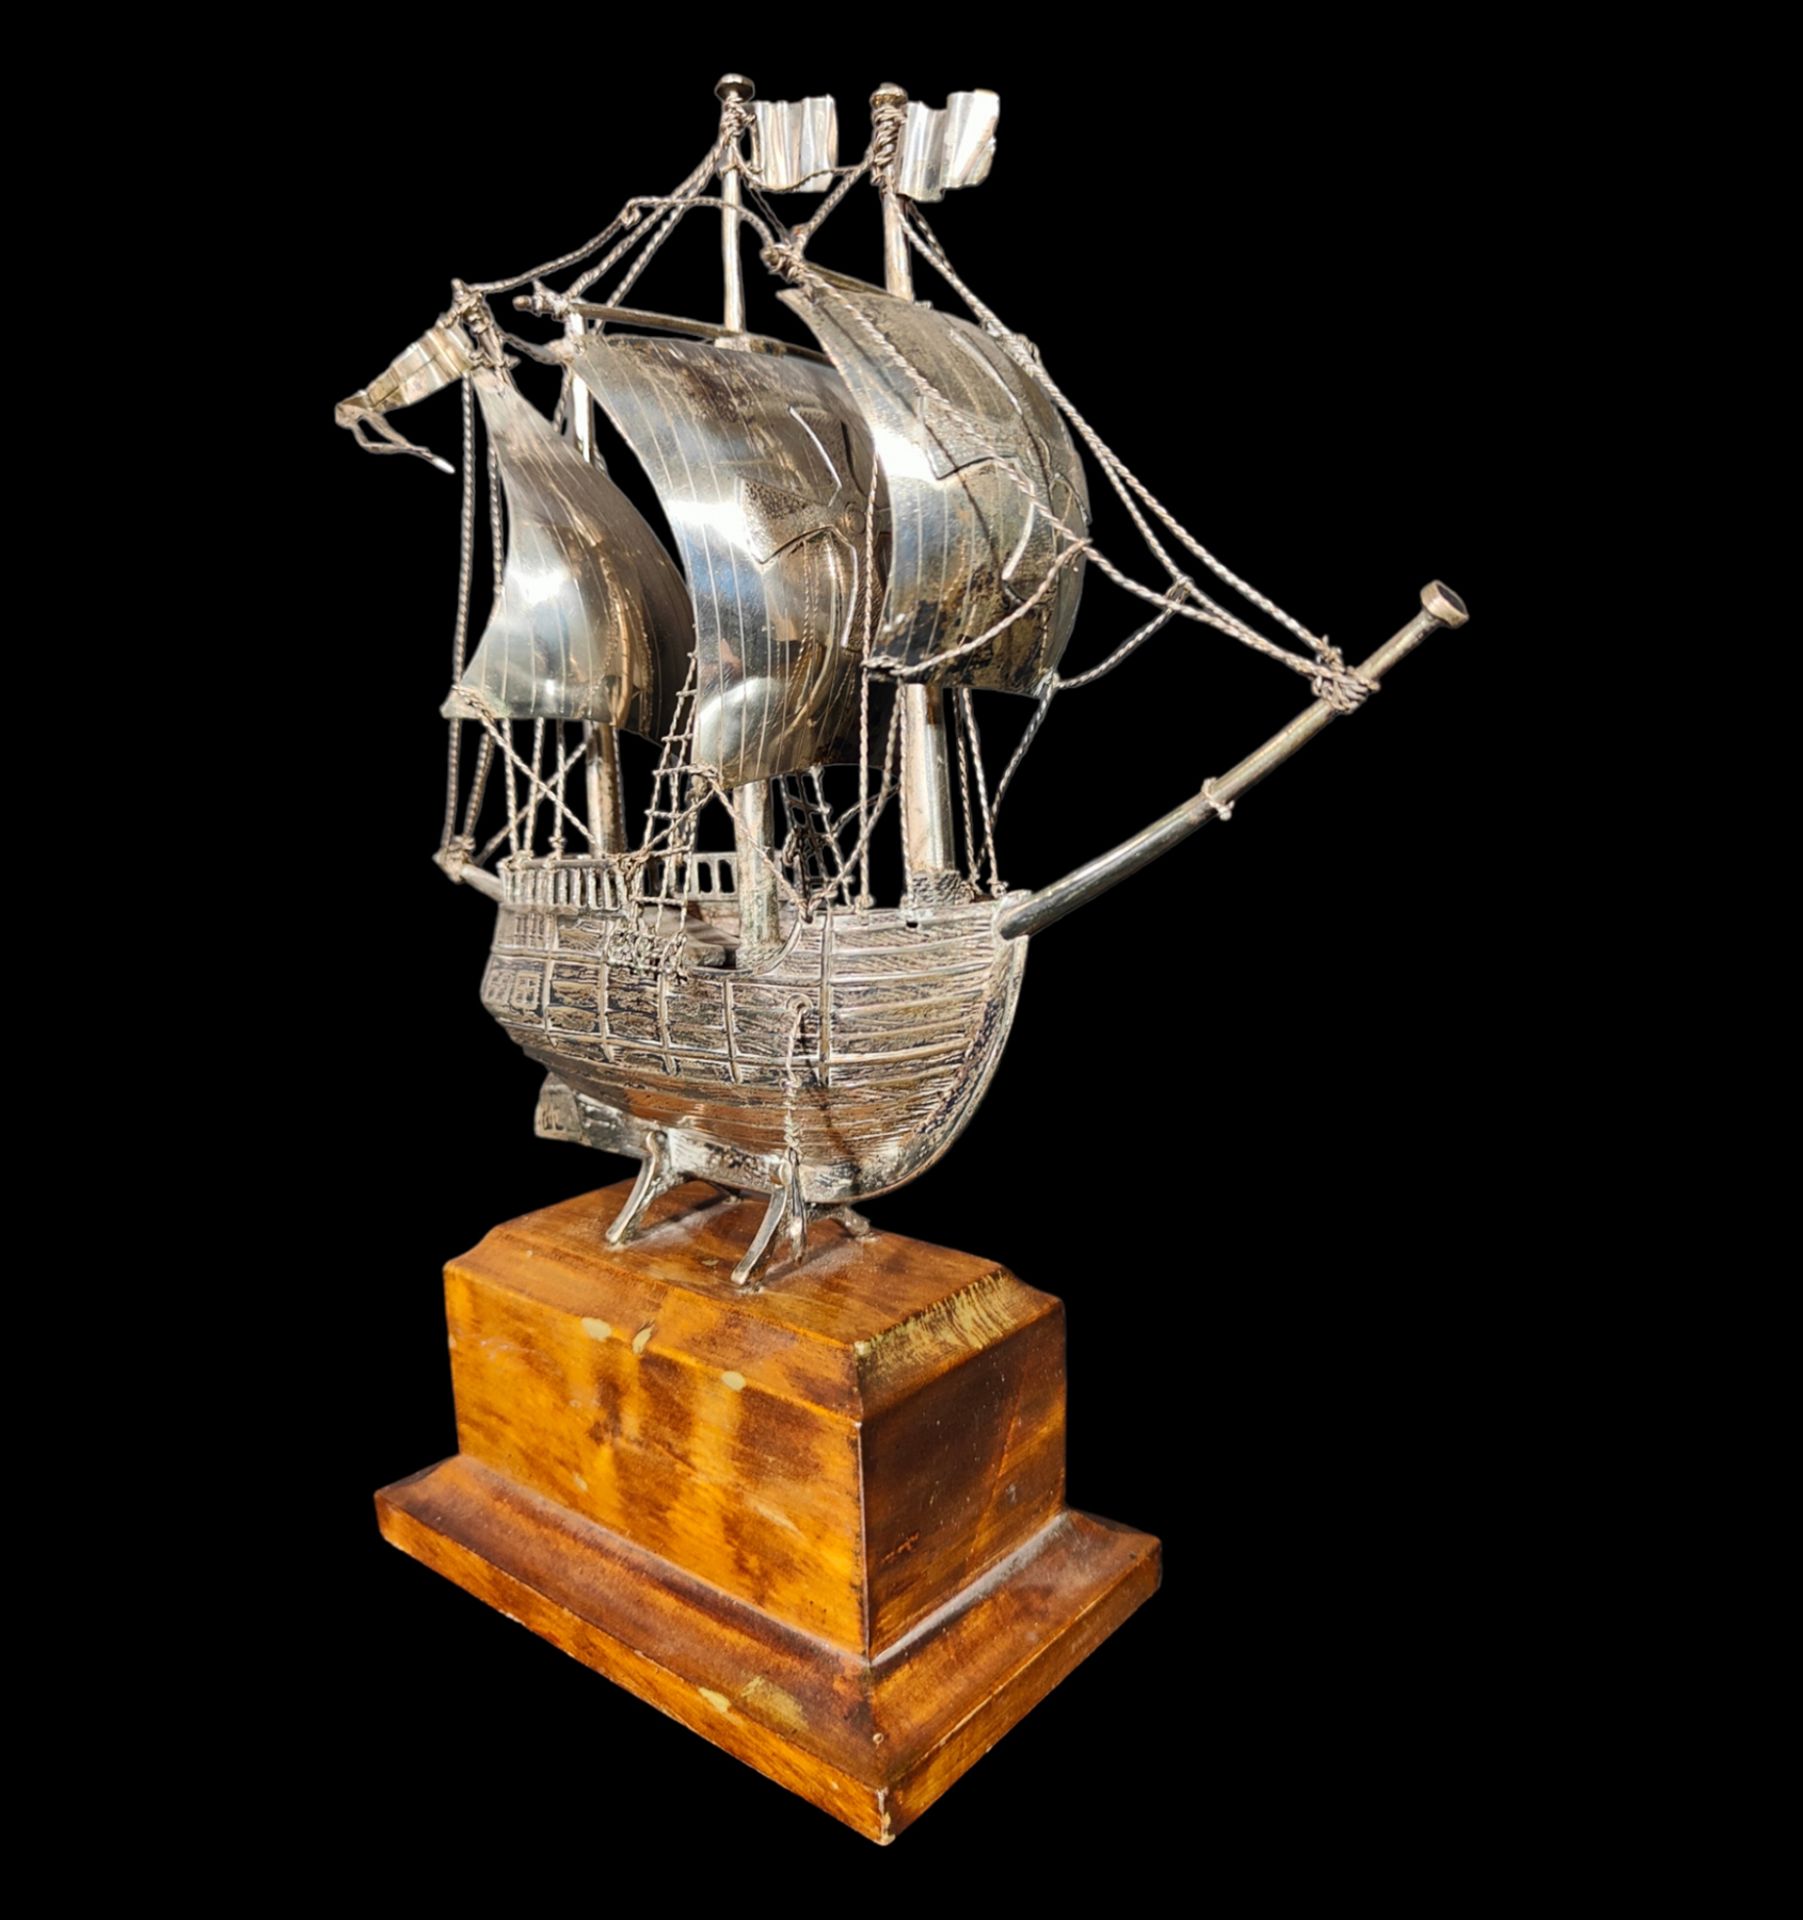 Spanish Galleon in Punched Sterling Silver, 20th century - Image 3 of 3